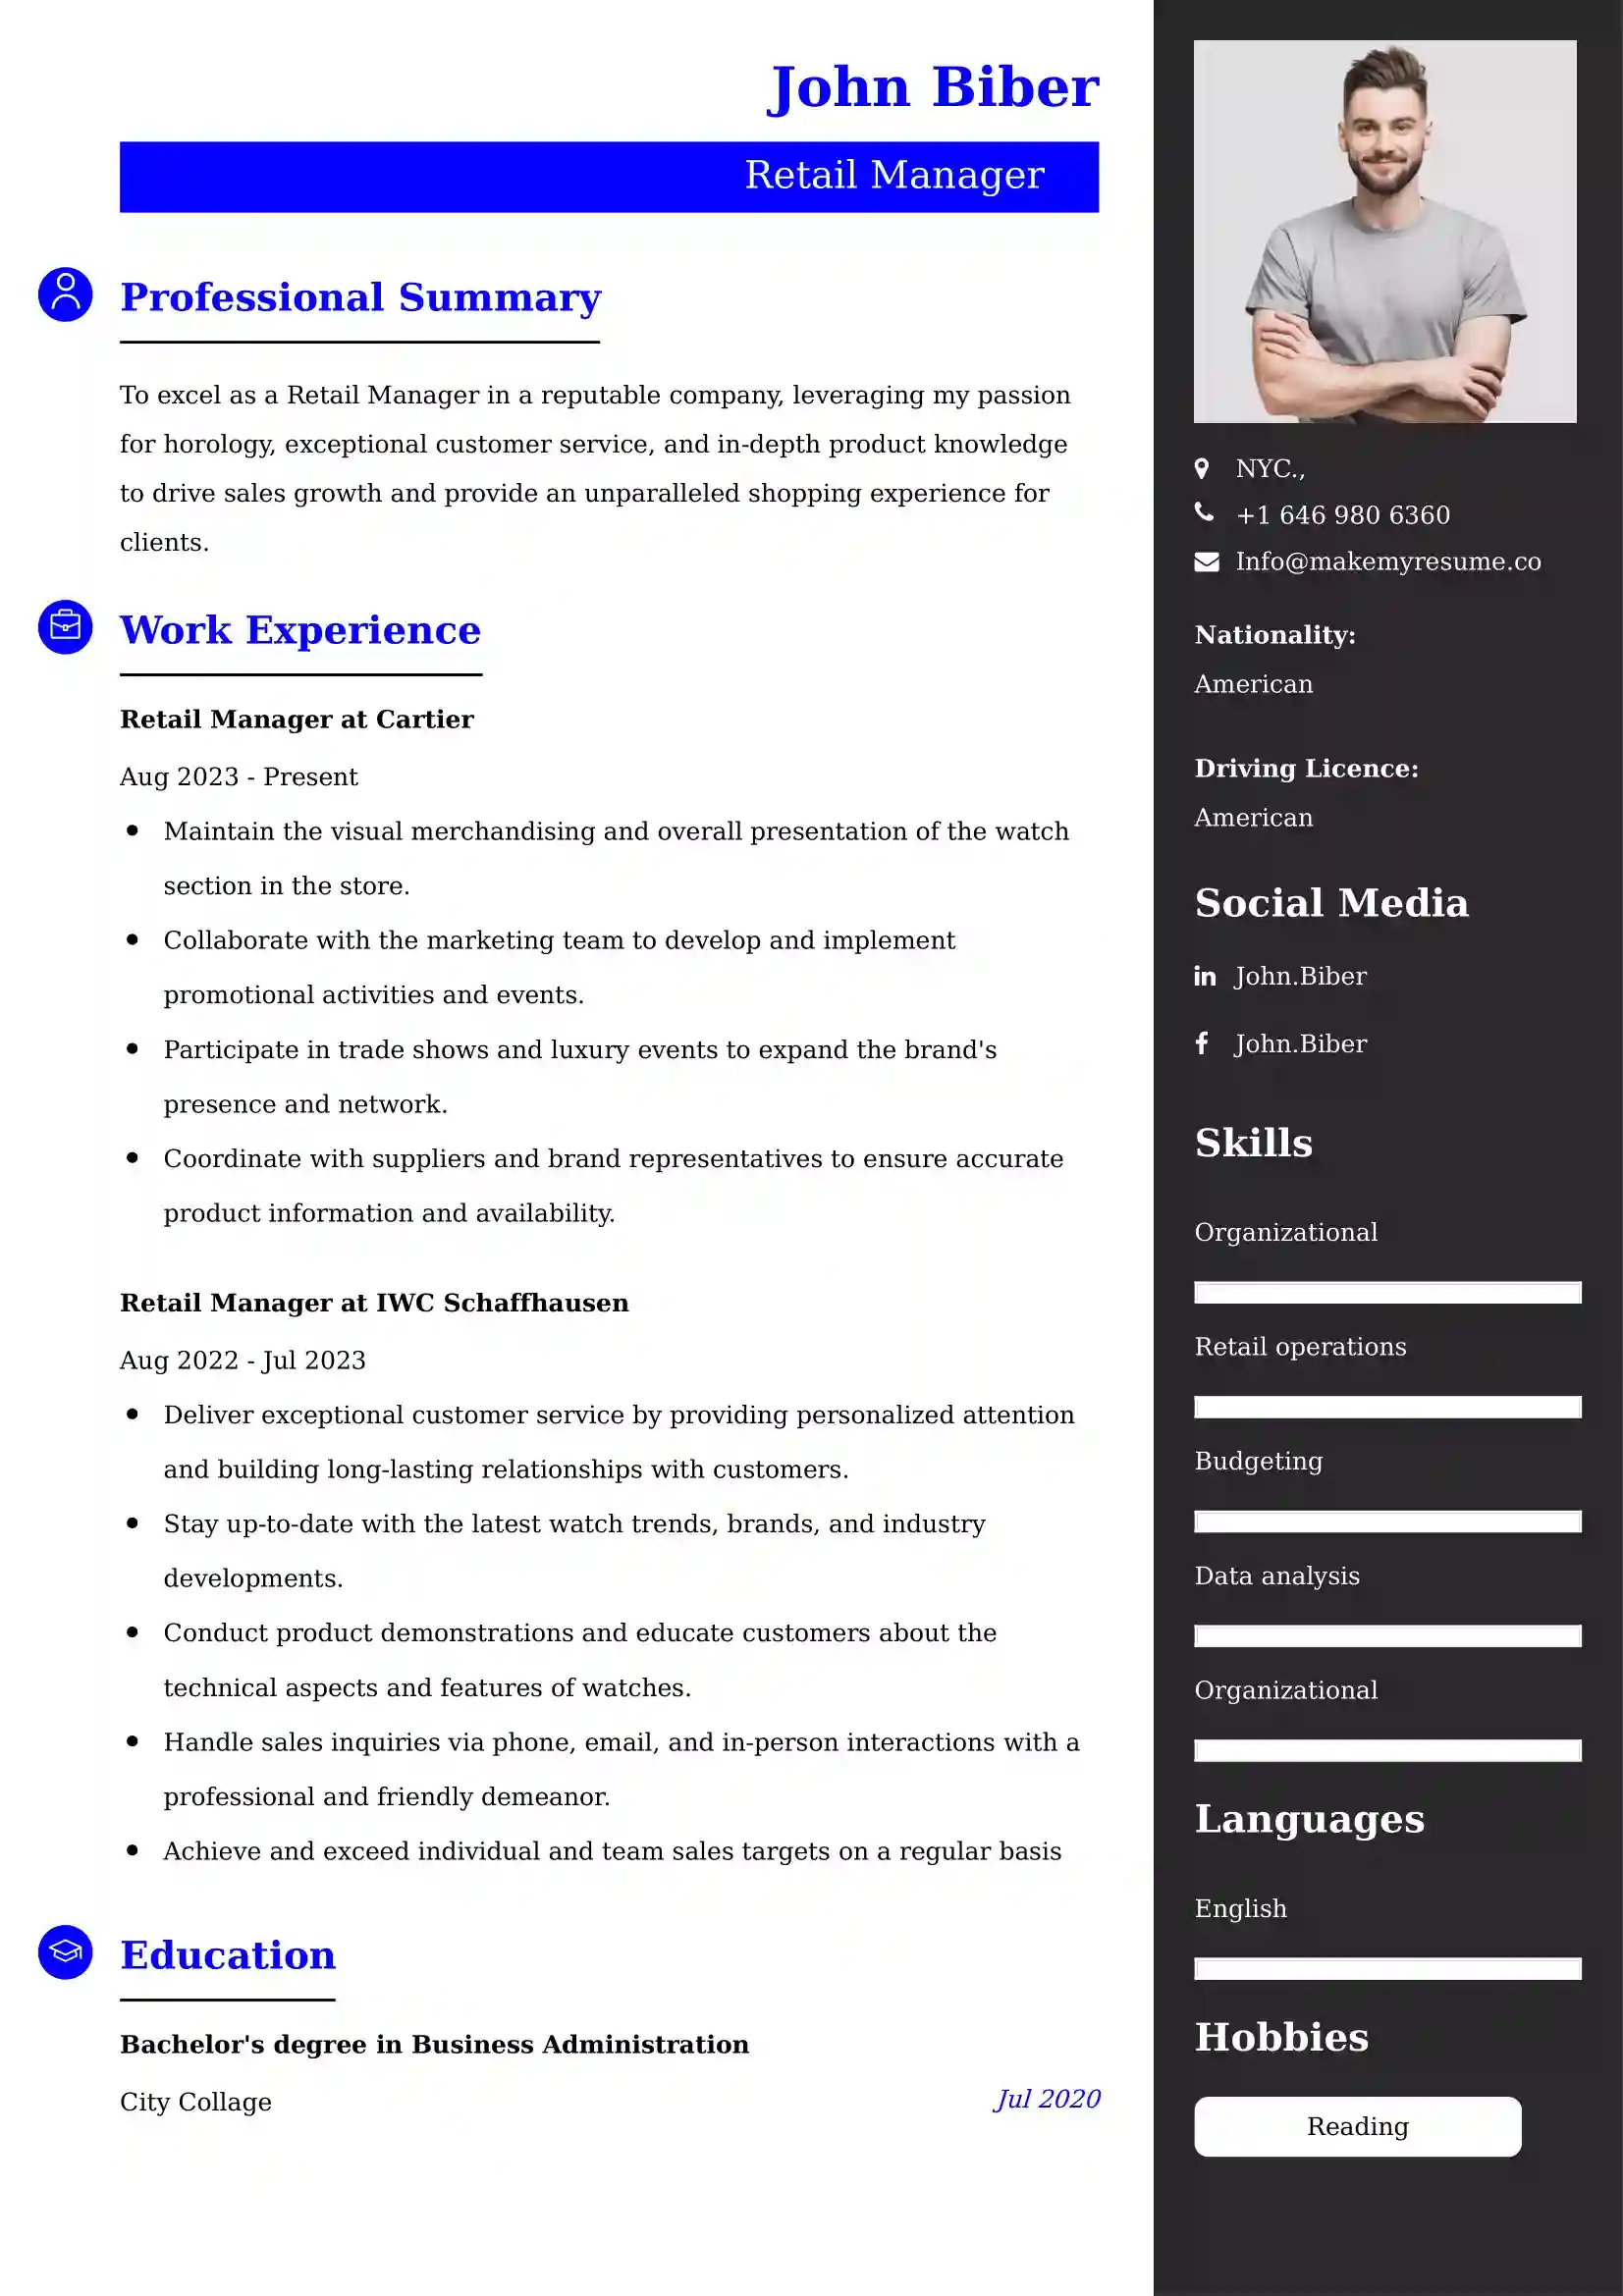 Retail Manager Resume Examples for UK Jobs - Tips and Guide